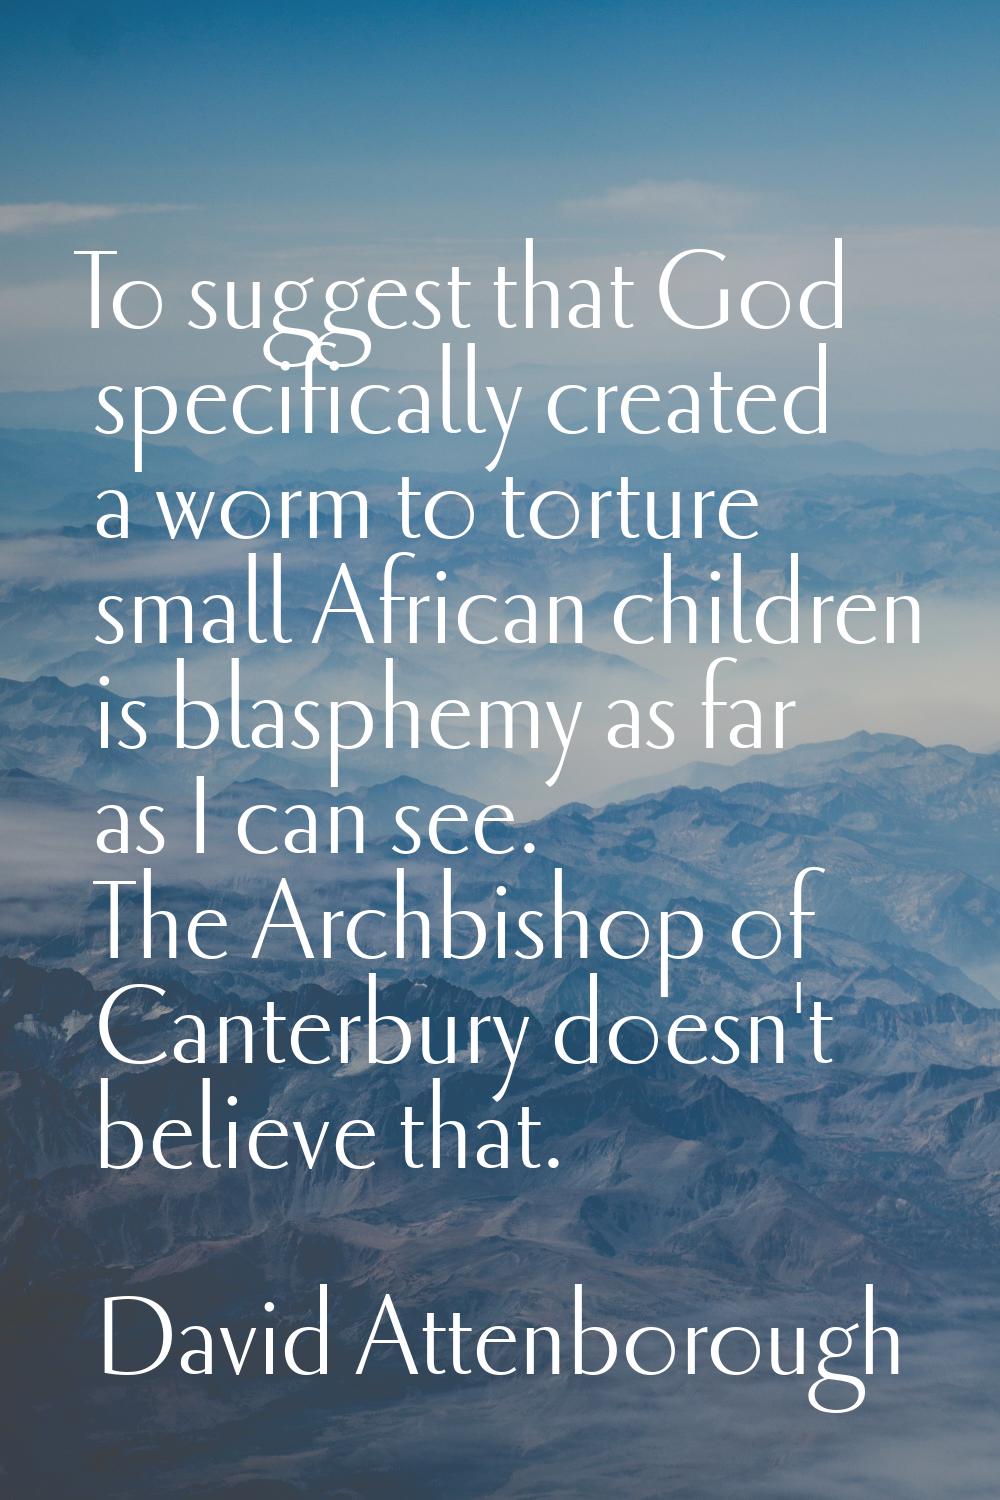 To suggest that God specifically created a worm to torture small African children is blasphemy as f